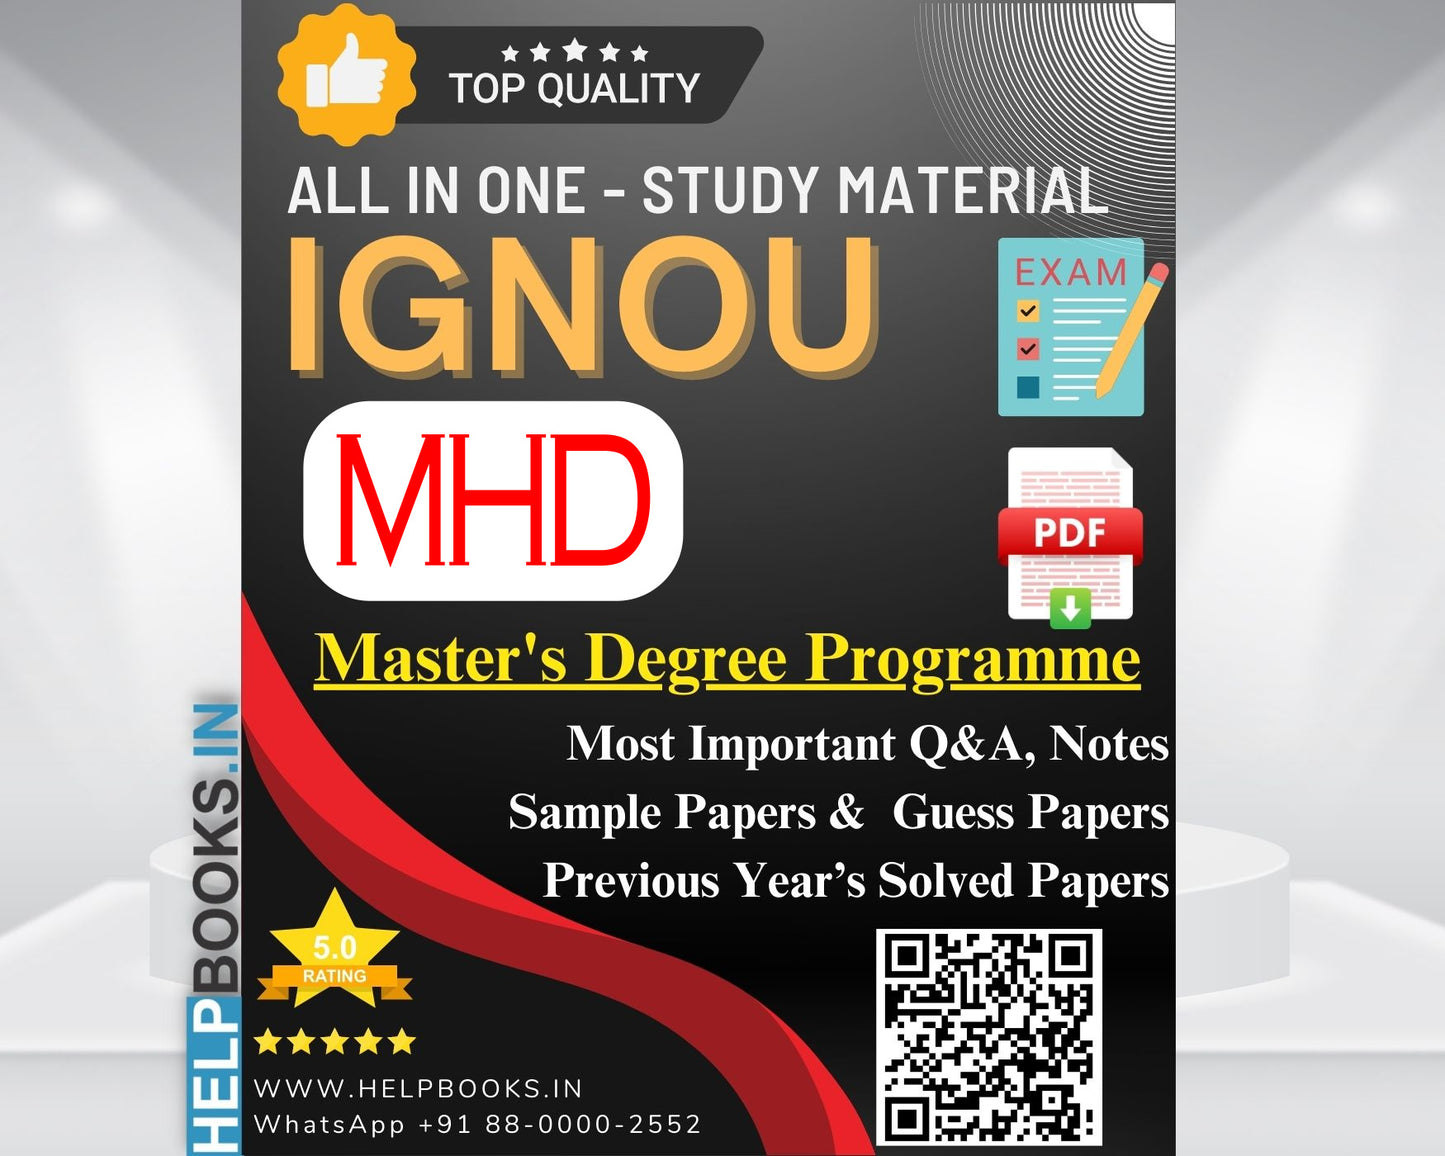 MHD IGNOU Exam Combo of 10 Solved Papers: 5 Previous Years' Solved Papers & 5 Sample Guess Papers for Master of Arts Hindi